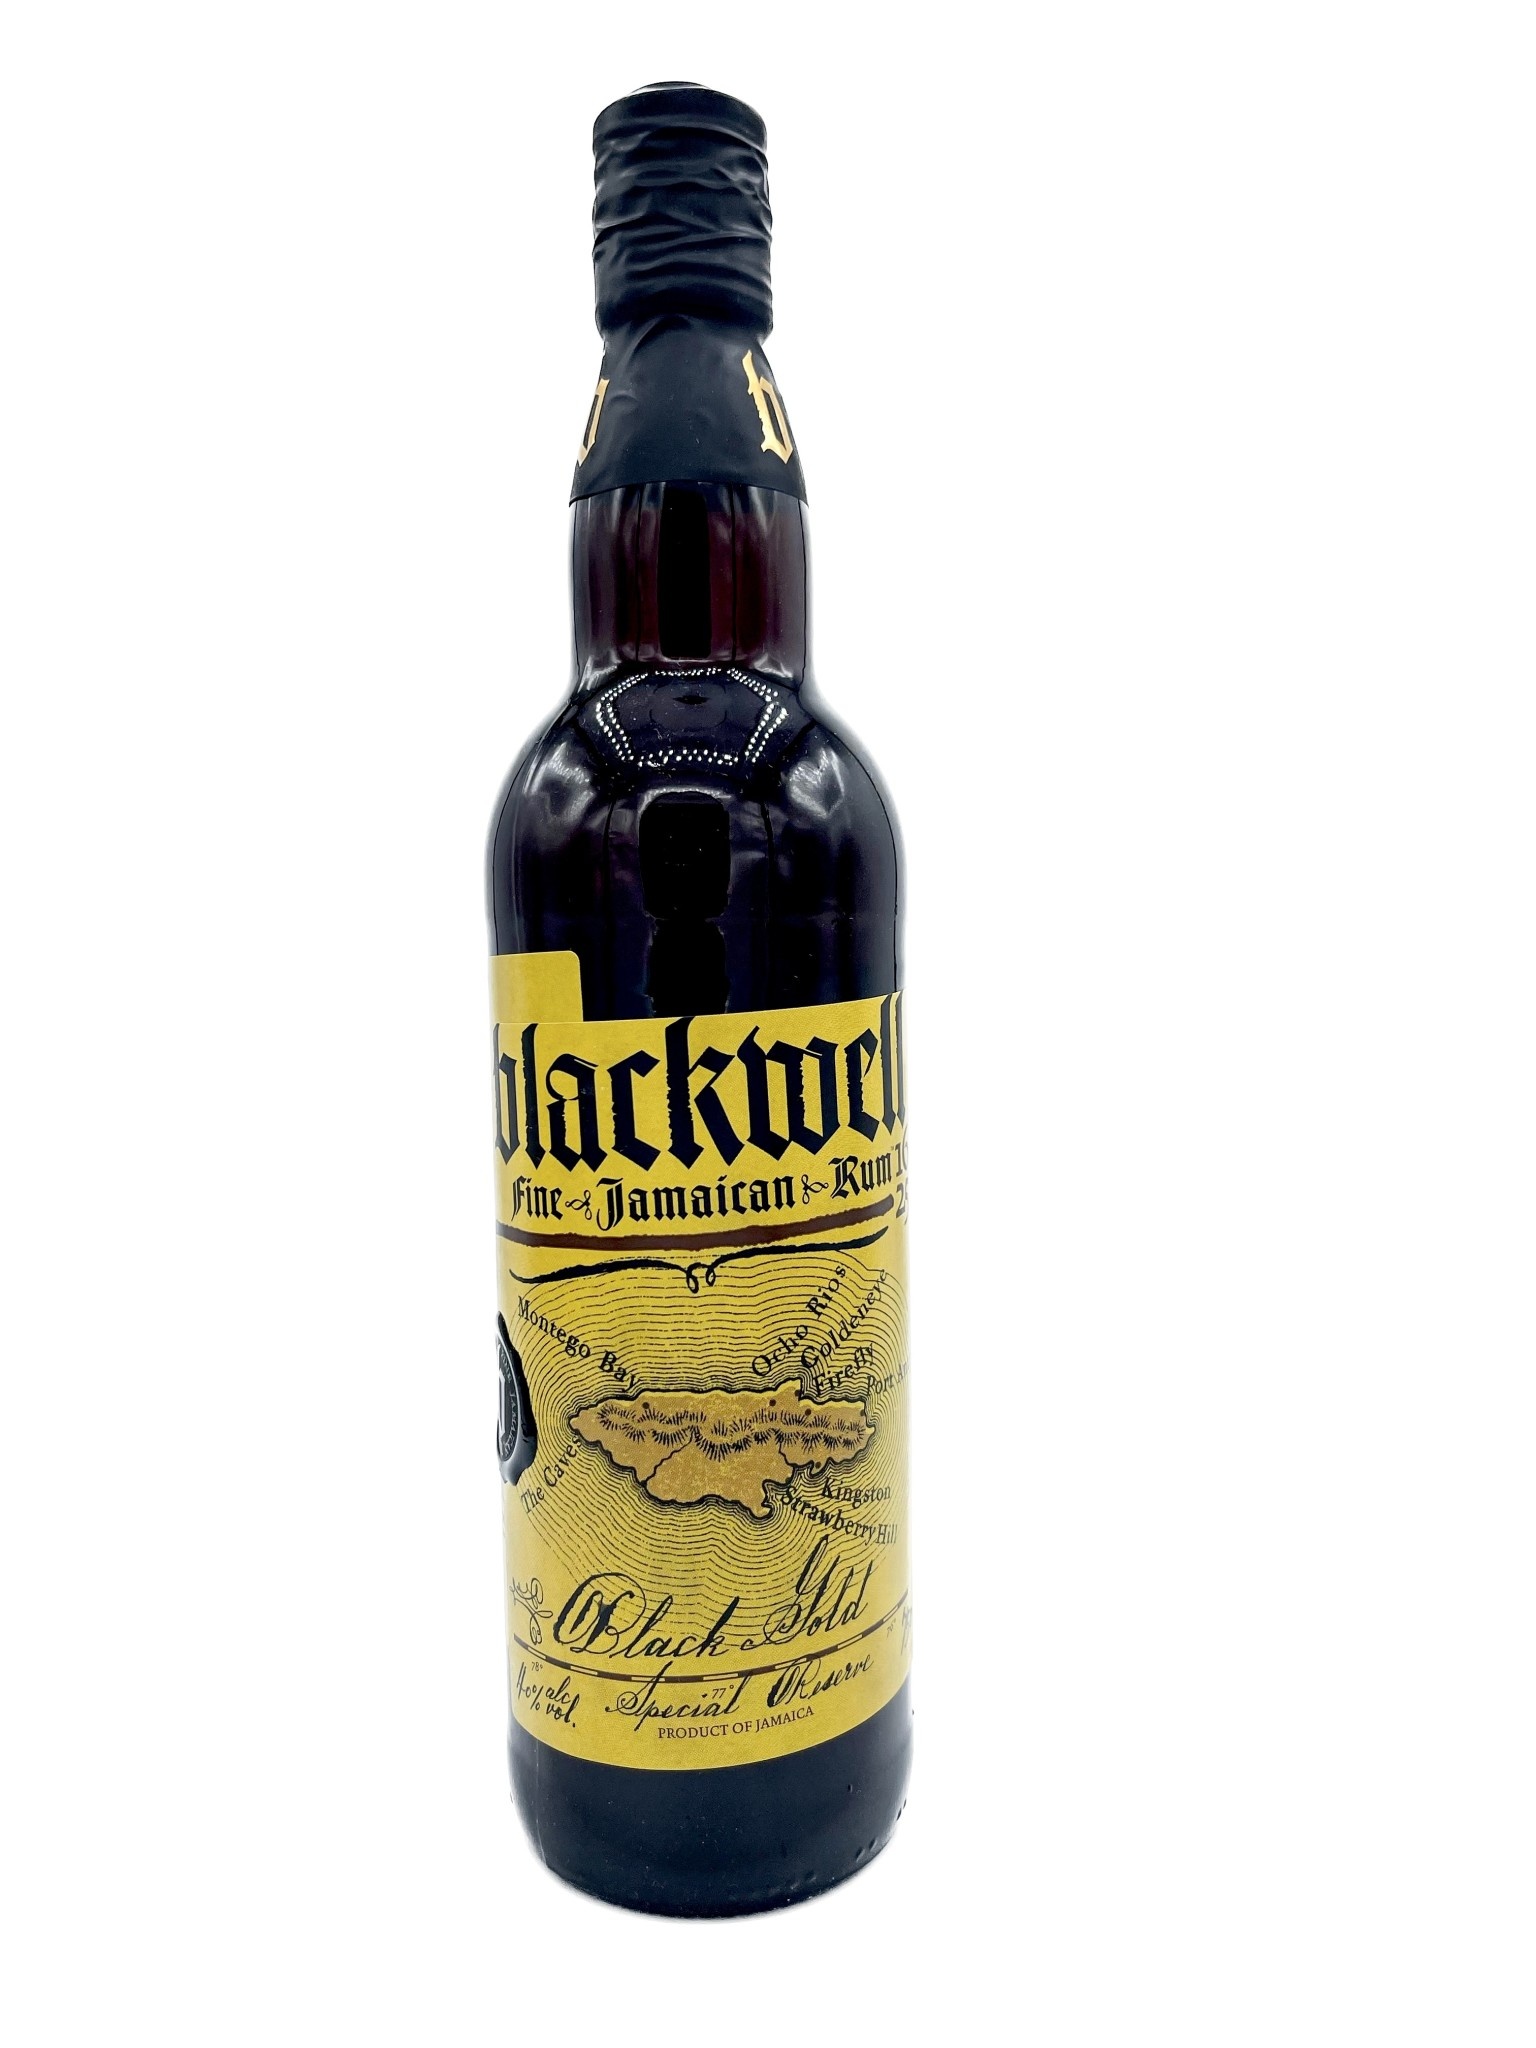 Blackwell Jamaican Rum Black Gold Special Reserve 750ml (80 Proof)